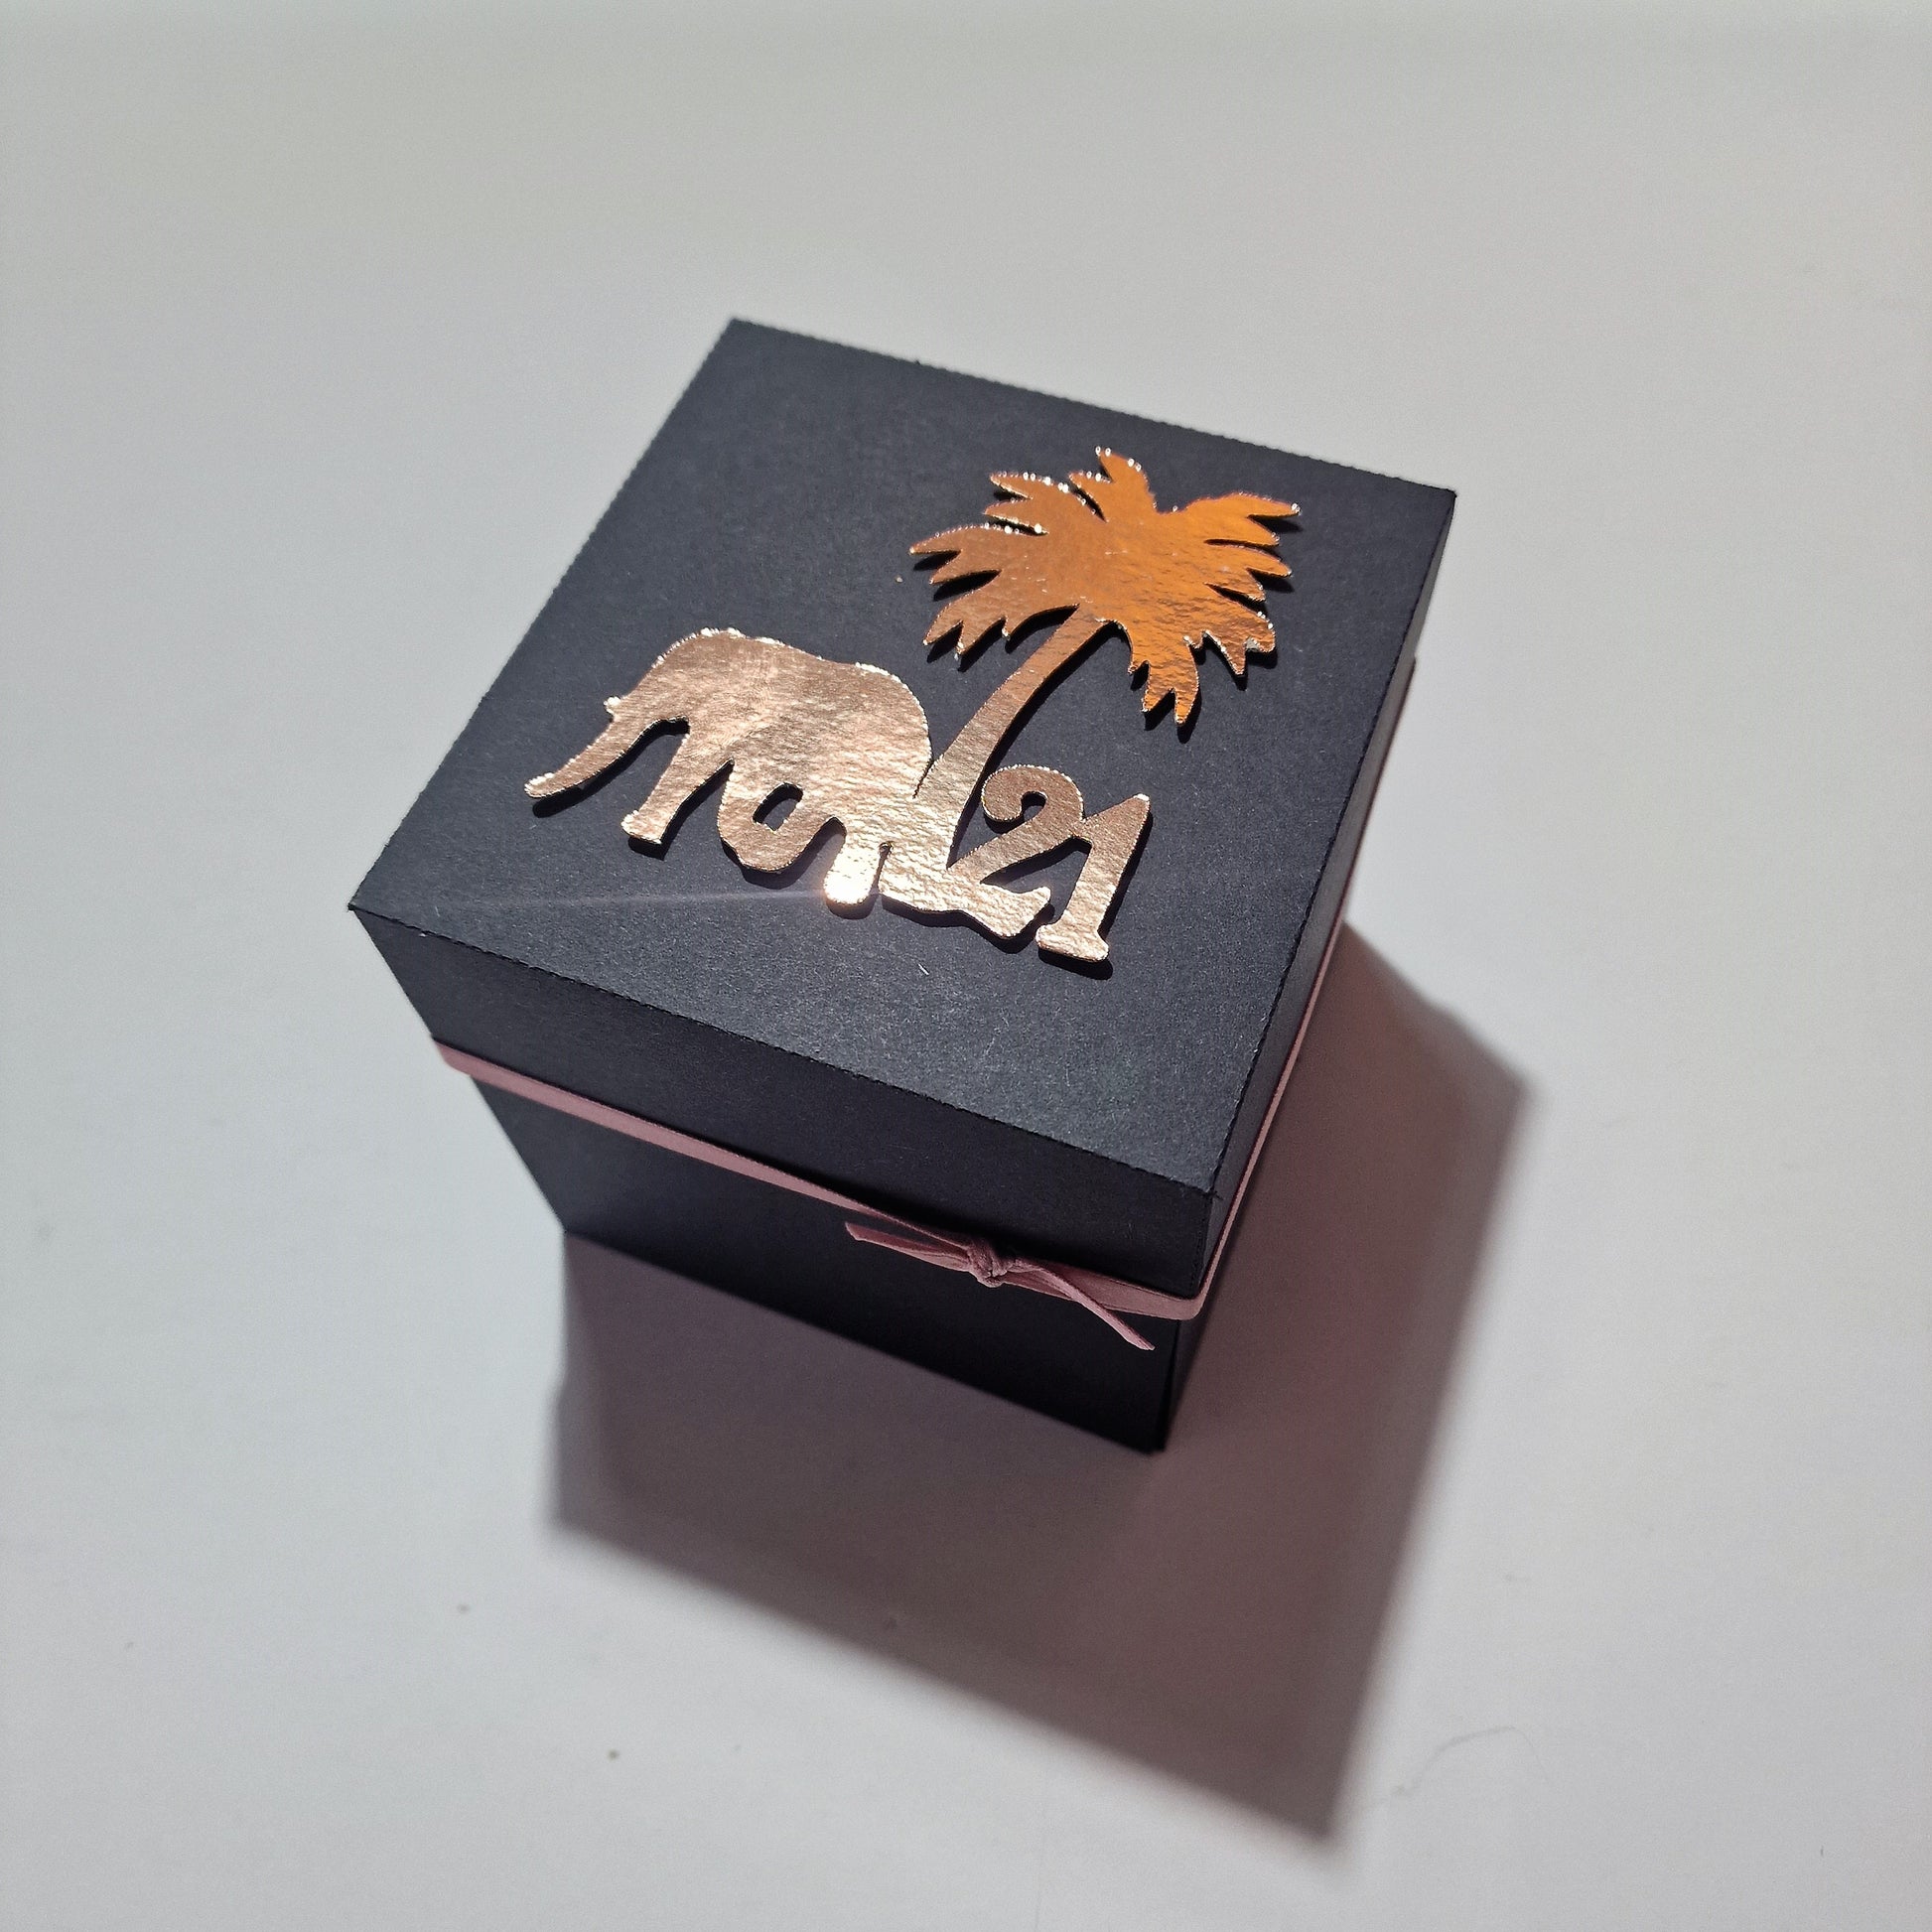 Black Exploding Thailand Trip Reveal Box with Rose Gold Accents. Contains all the relevant trip information